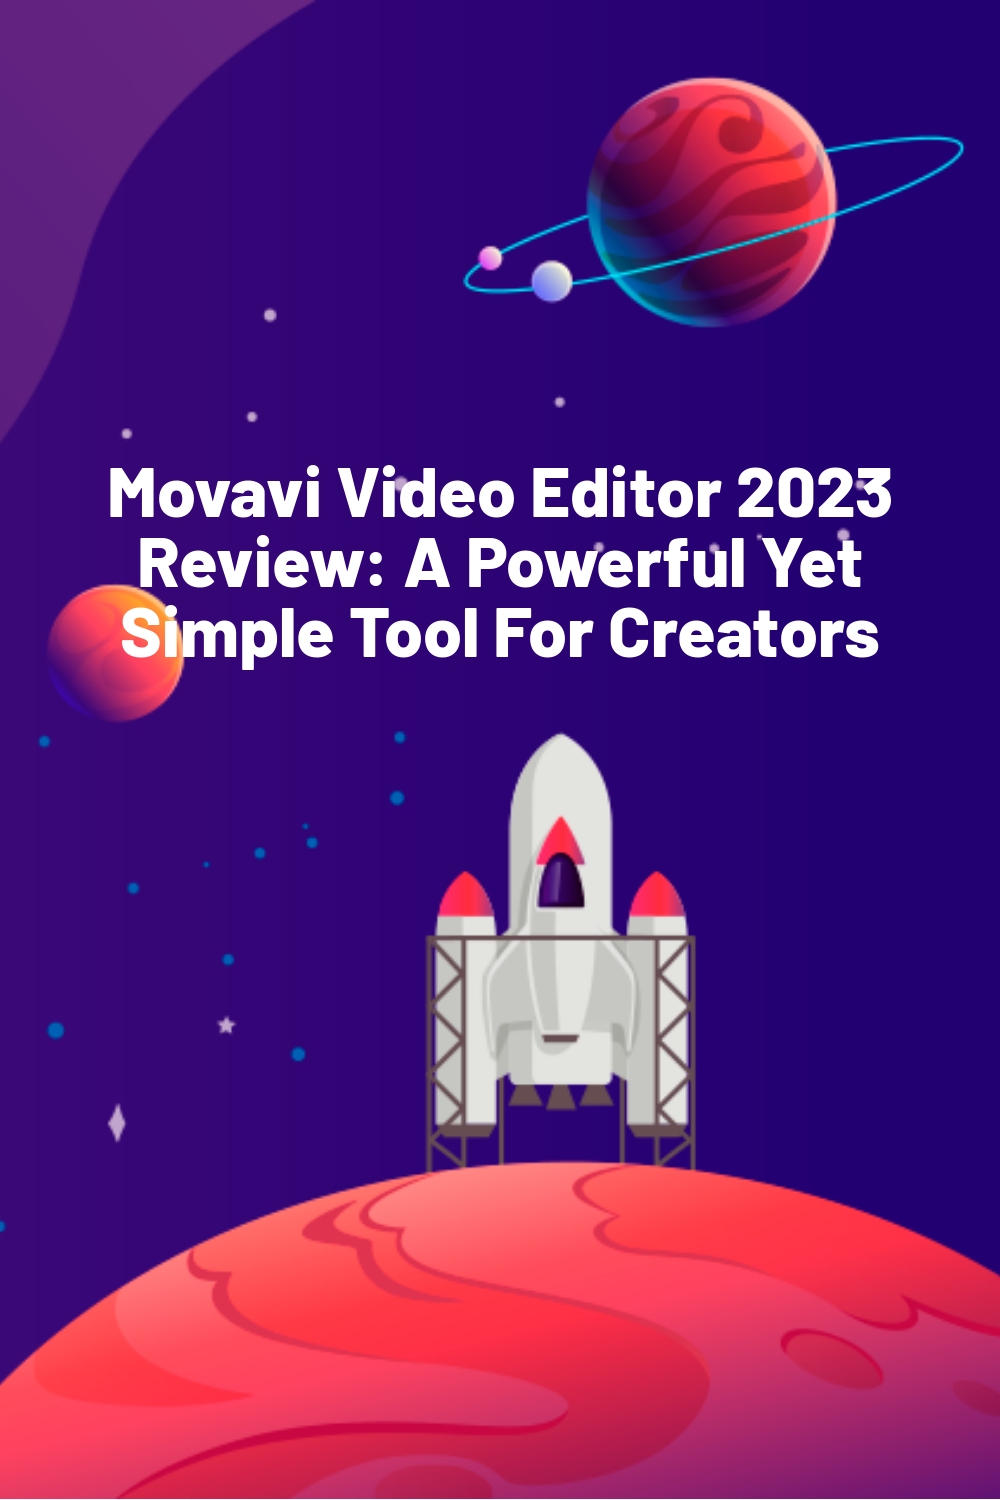 Movavi Video Editor 2023 Review: A Powerful Yet Simple Tool For Creators